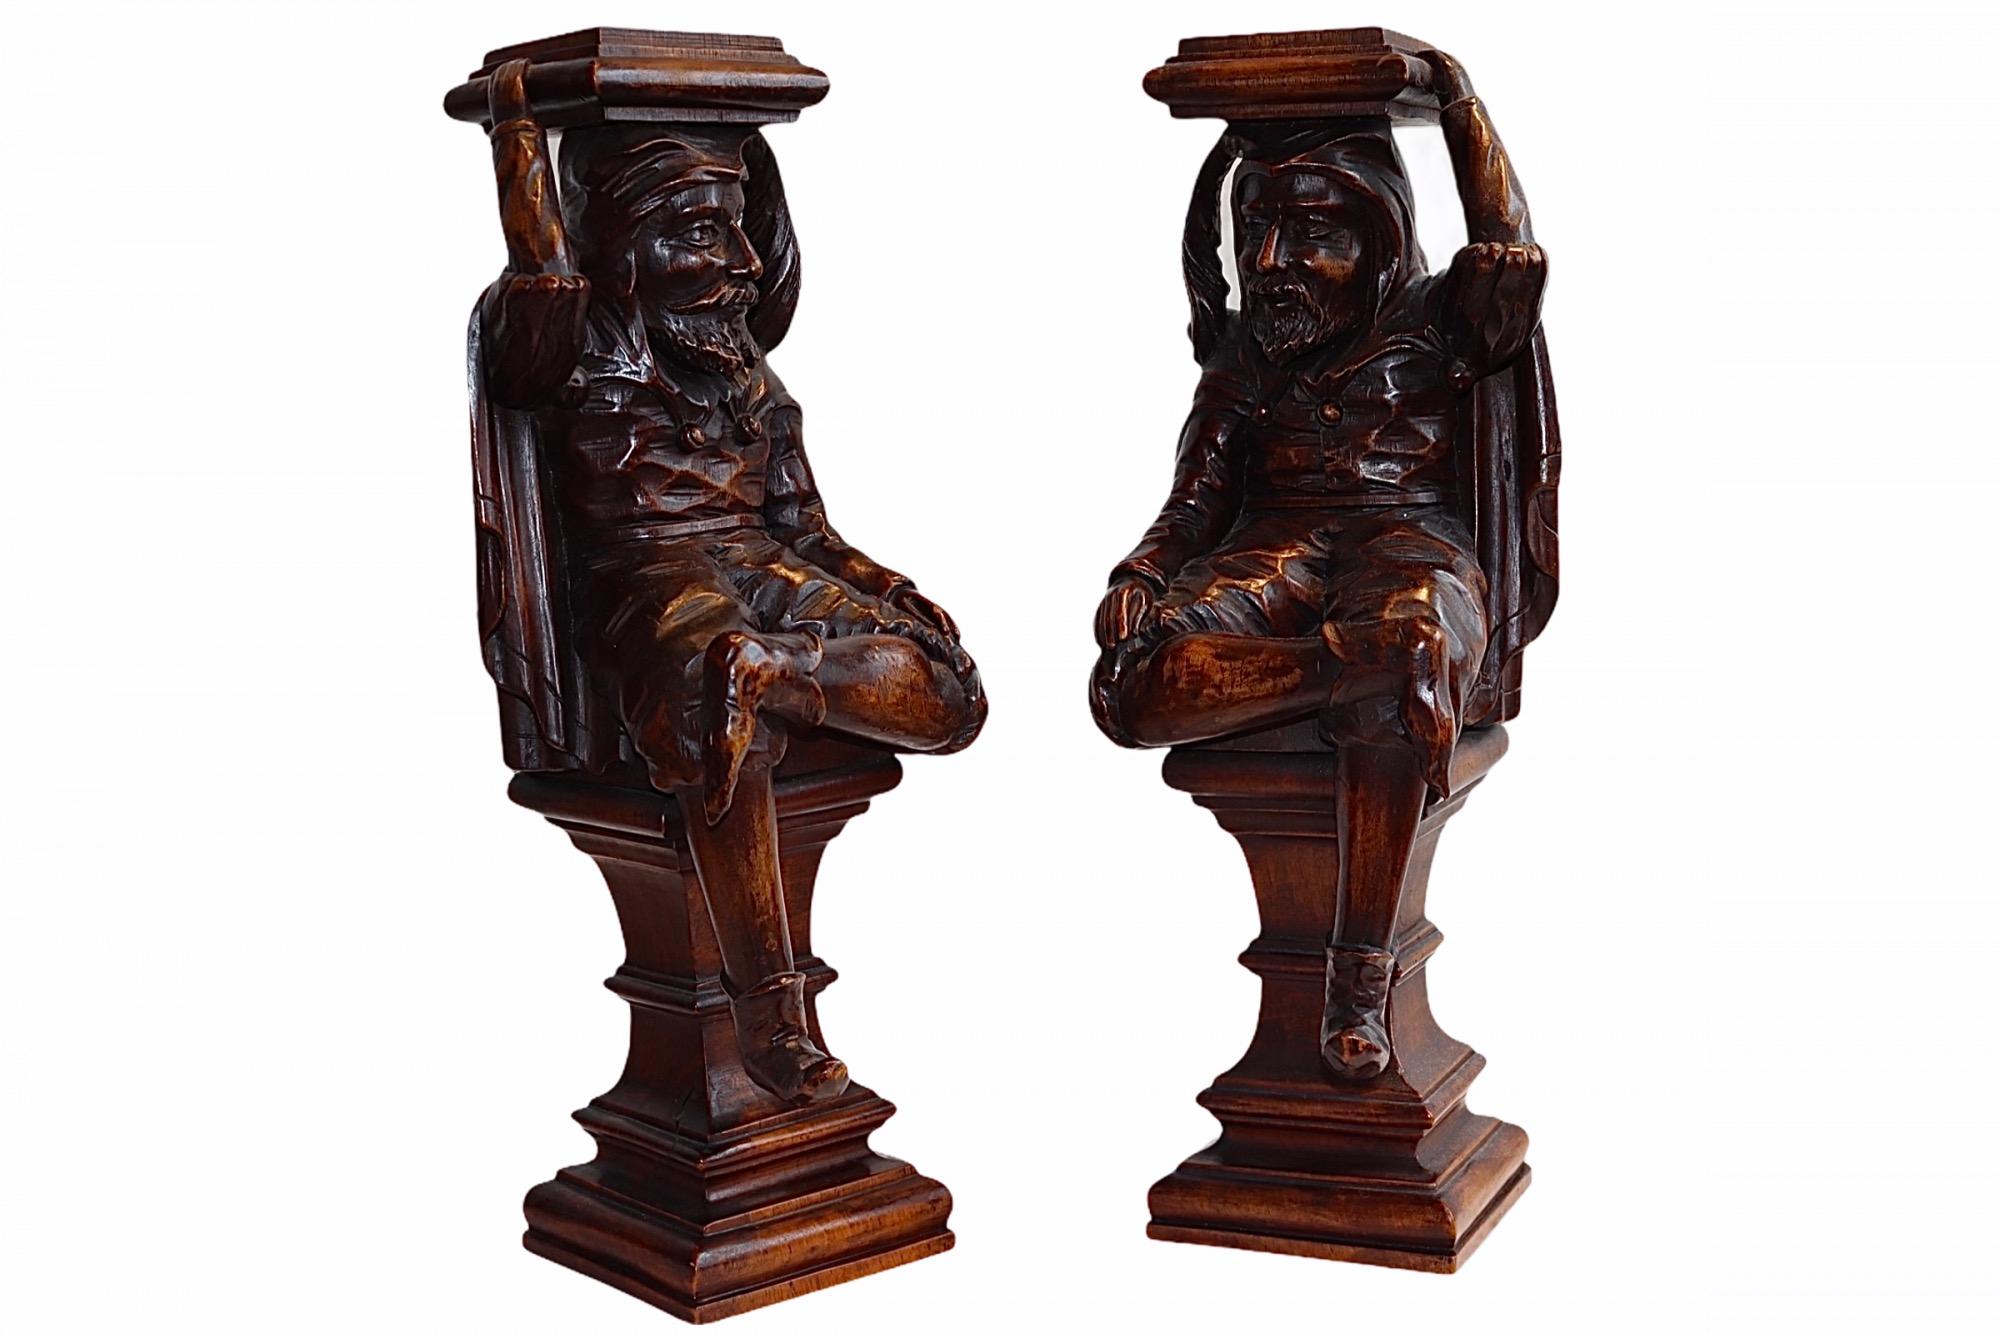 Pair of English Carved Walnut Wood Figures of Court Jesters, 18th Century In Distressed Condition For Sale In North Miami, FL